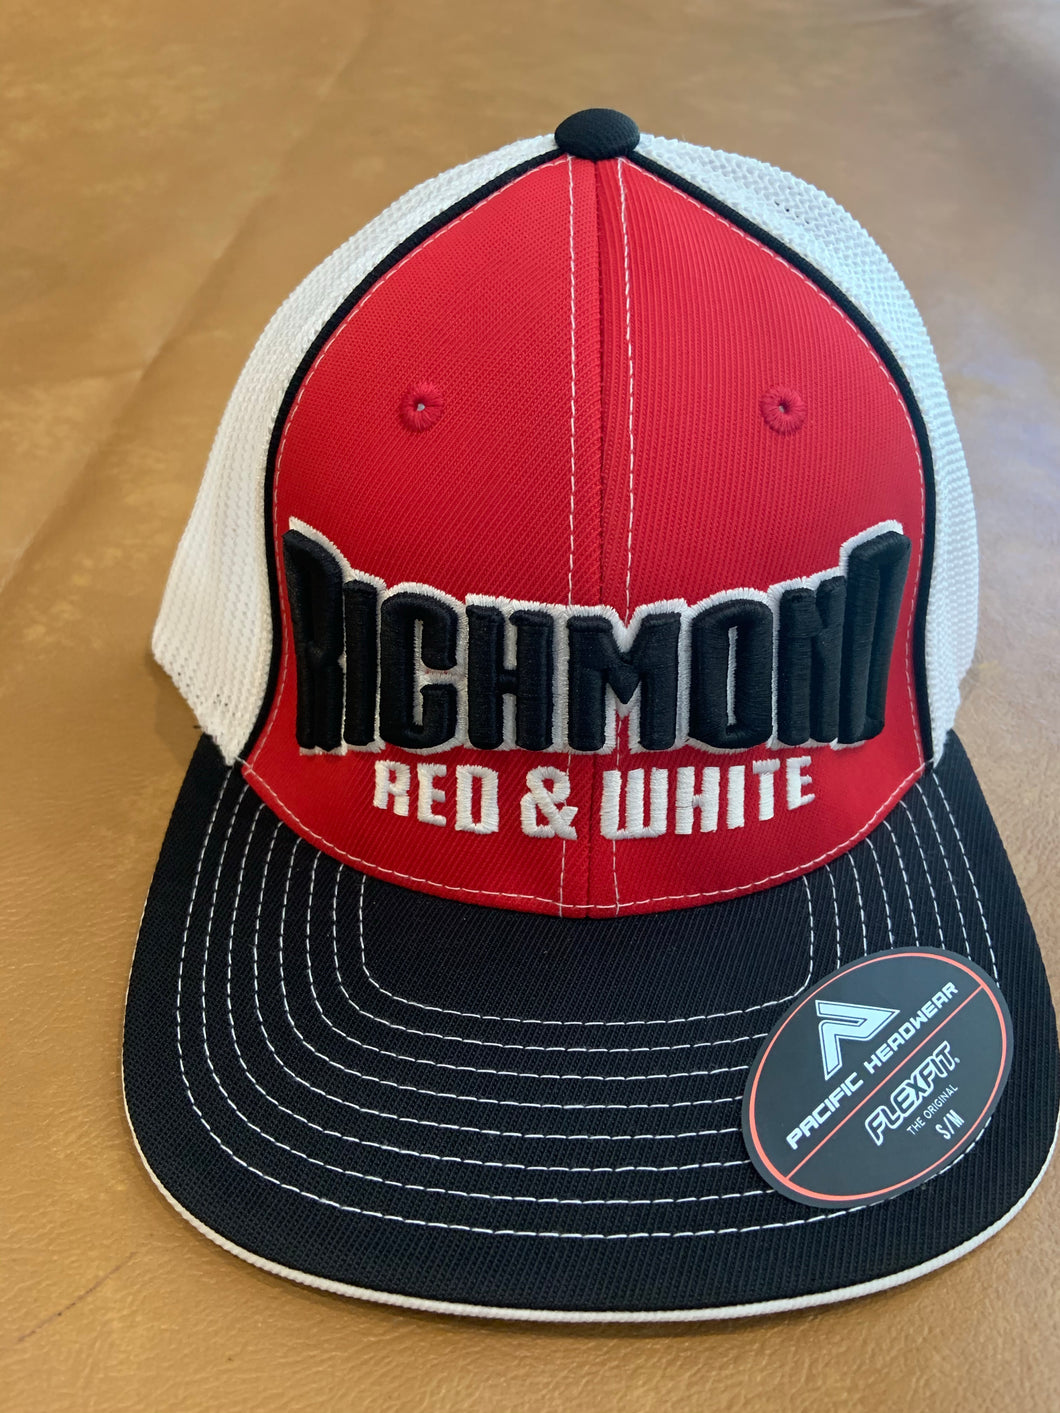 Red and White trucker hat